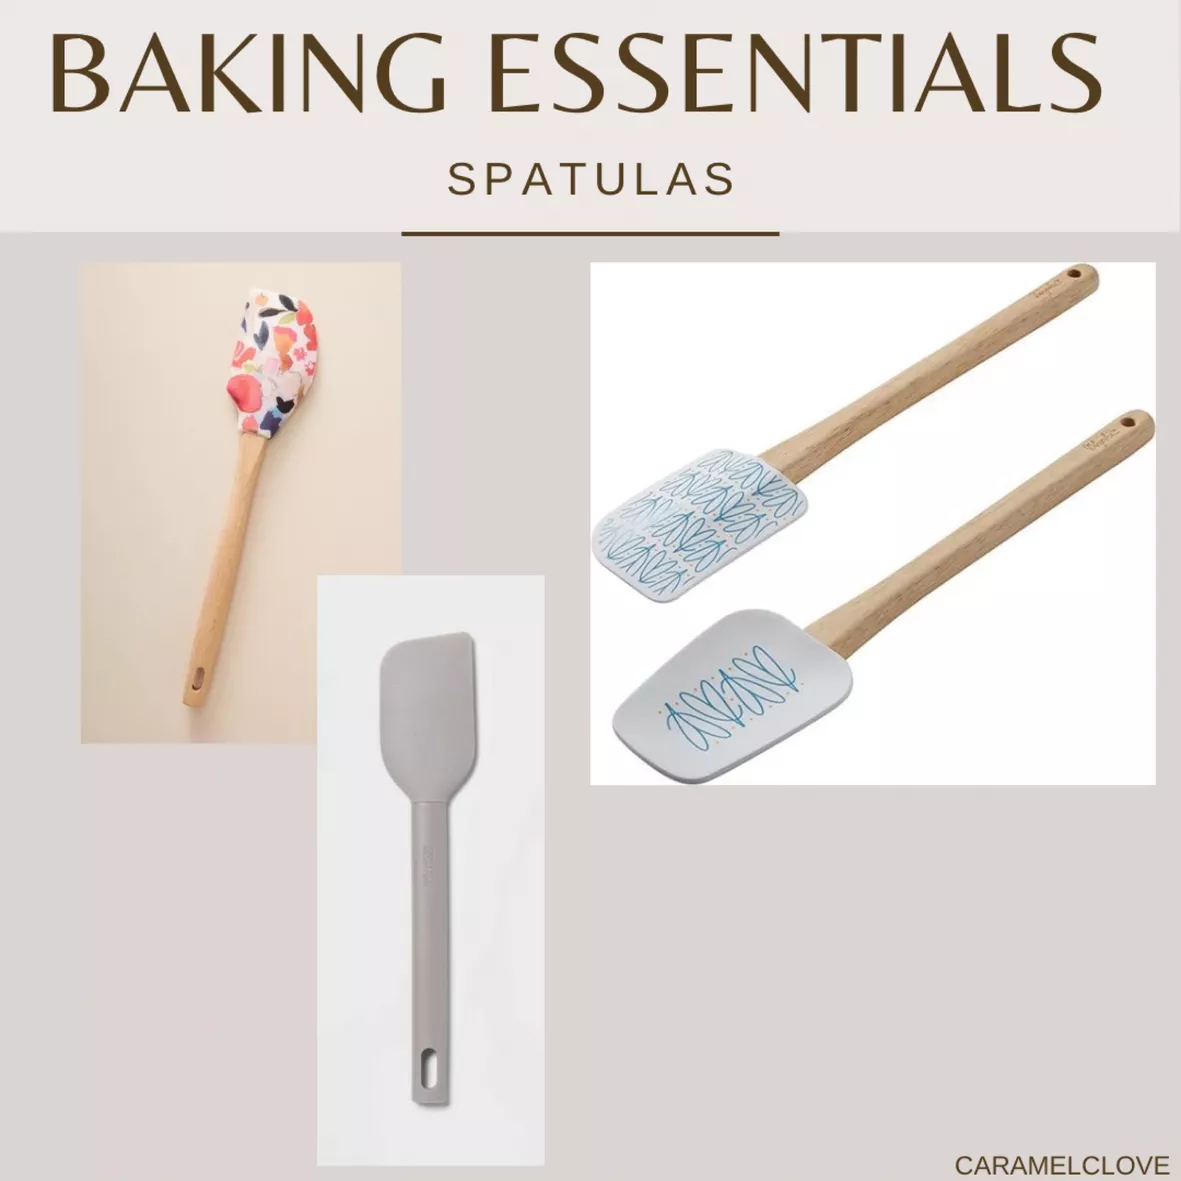 Here's all that you need- Baking essentials!